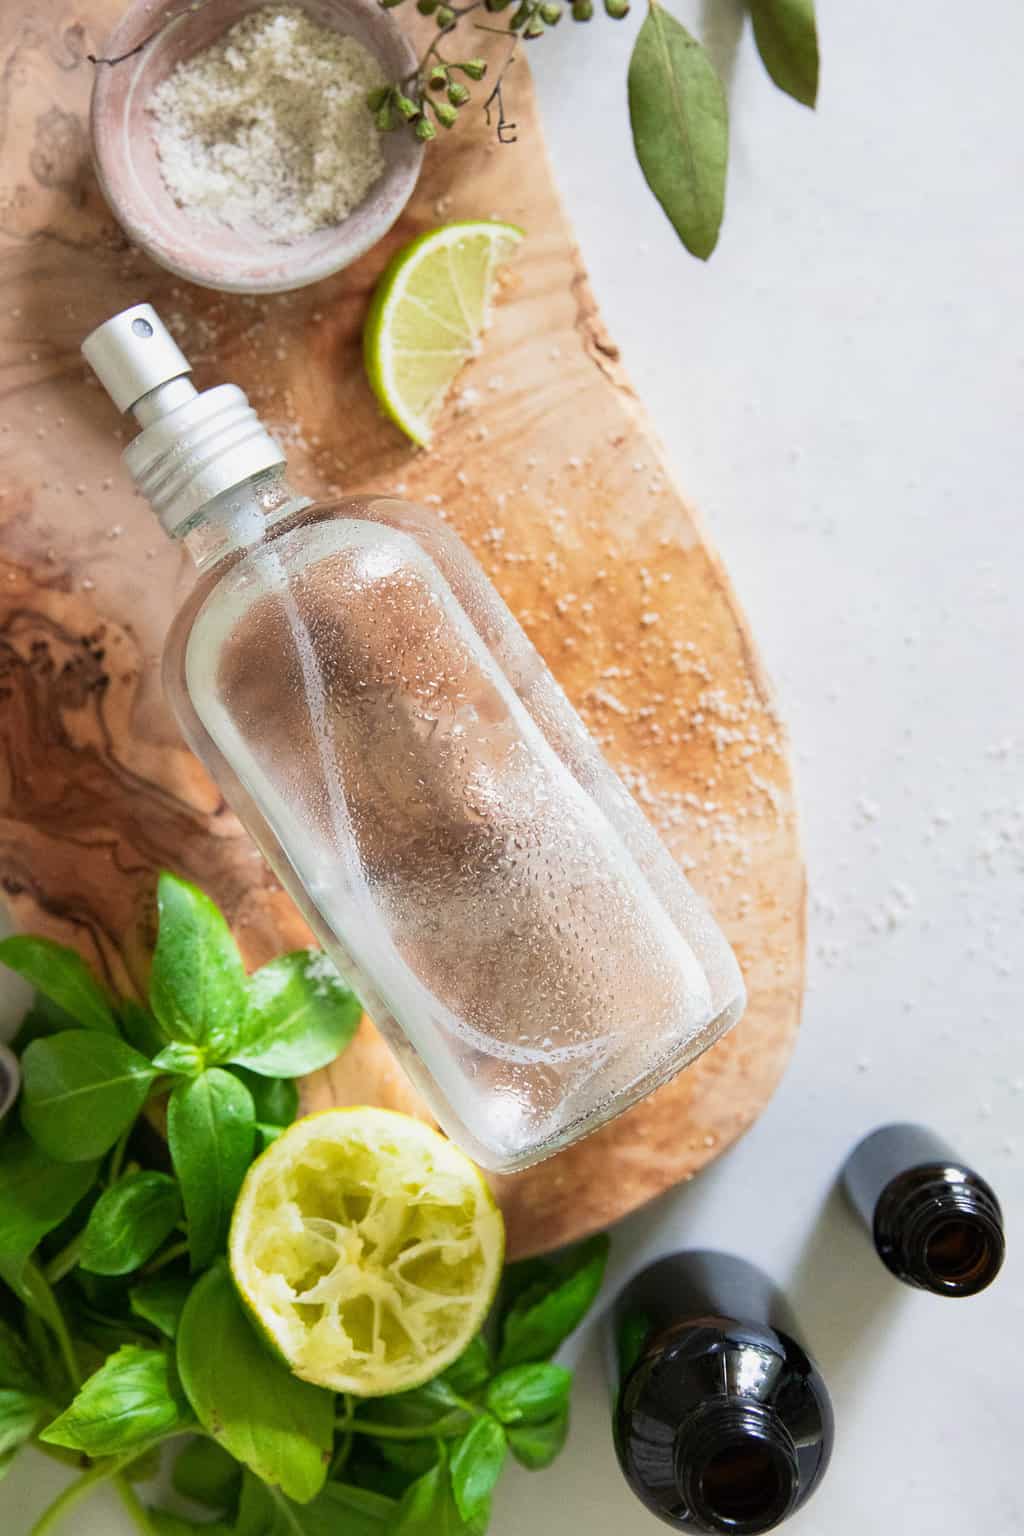 Summer Body Spray Recipe with Essential Oils and Everclear Grain Alcohol